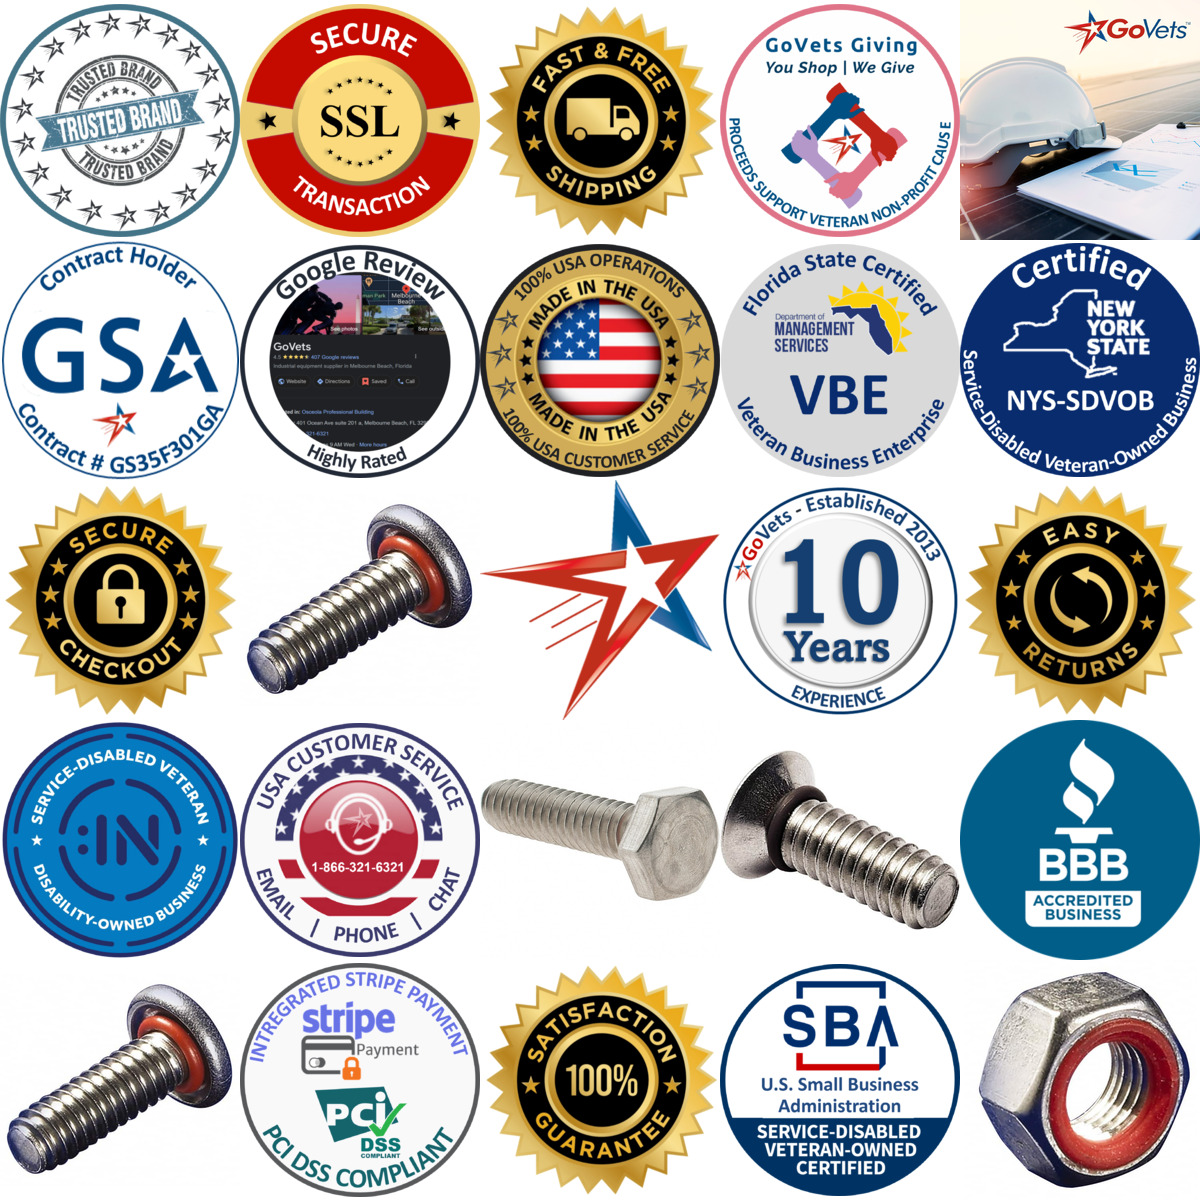 A selection of Self Sealing Fasteners products on GoVets